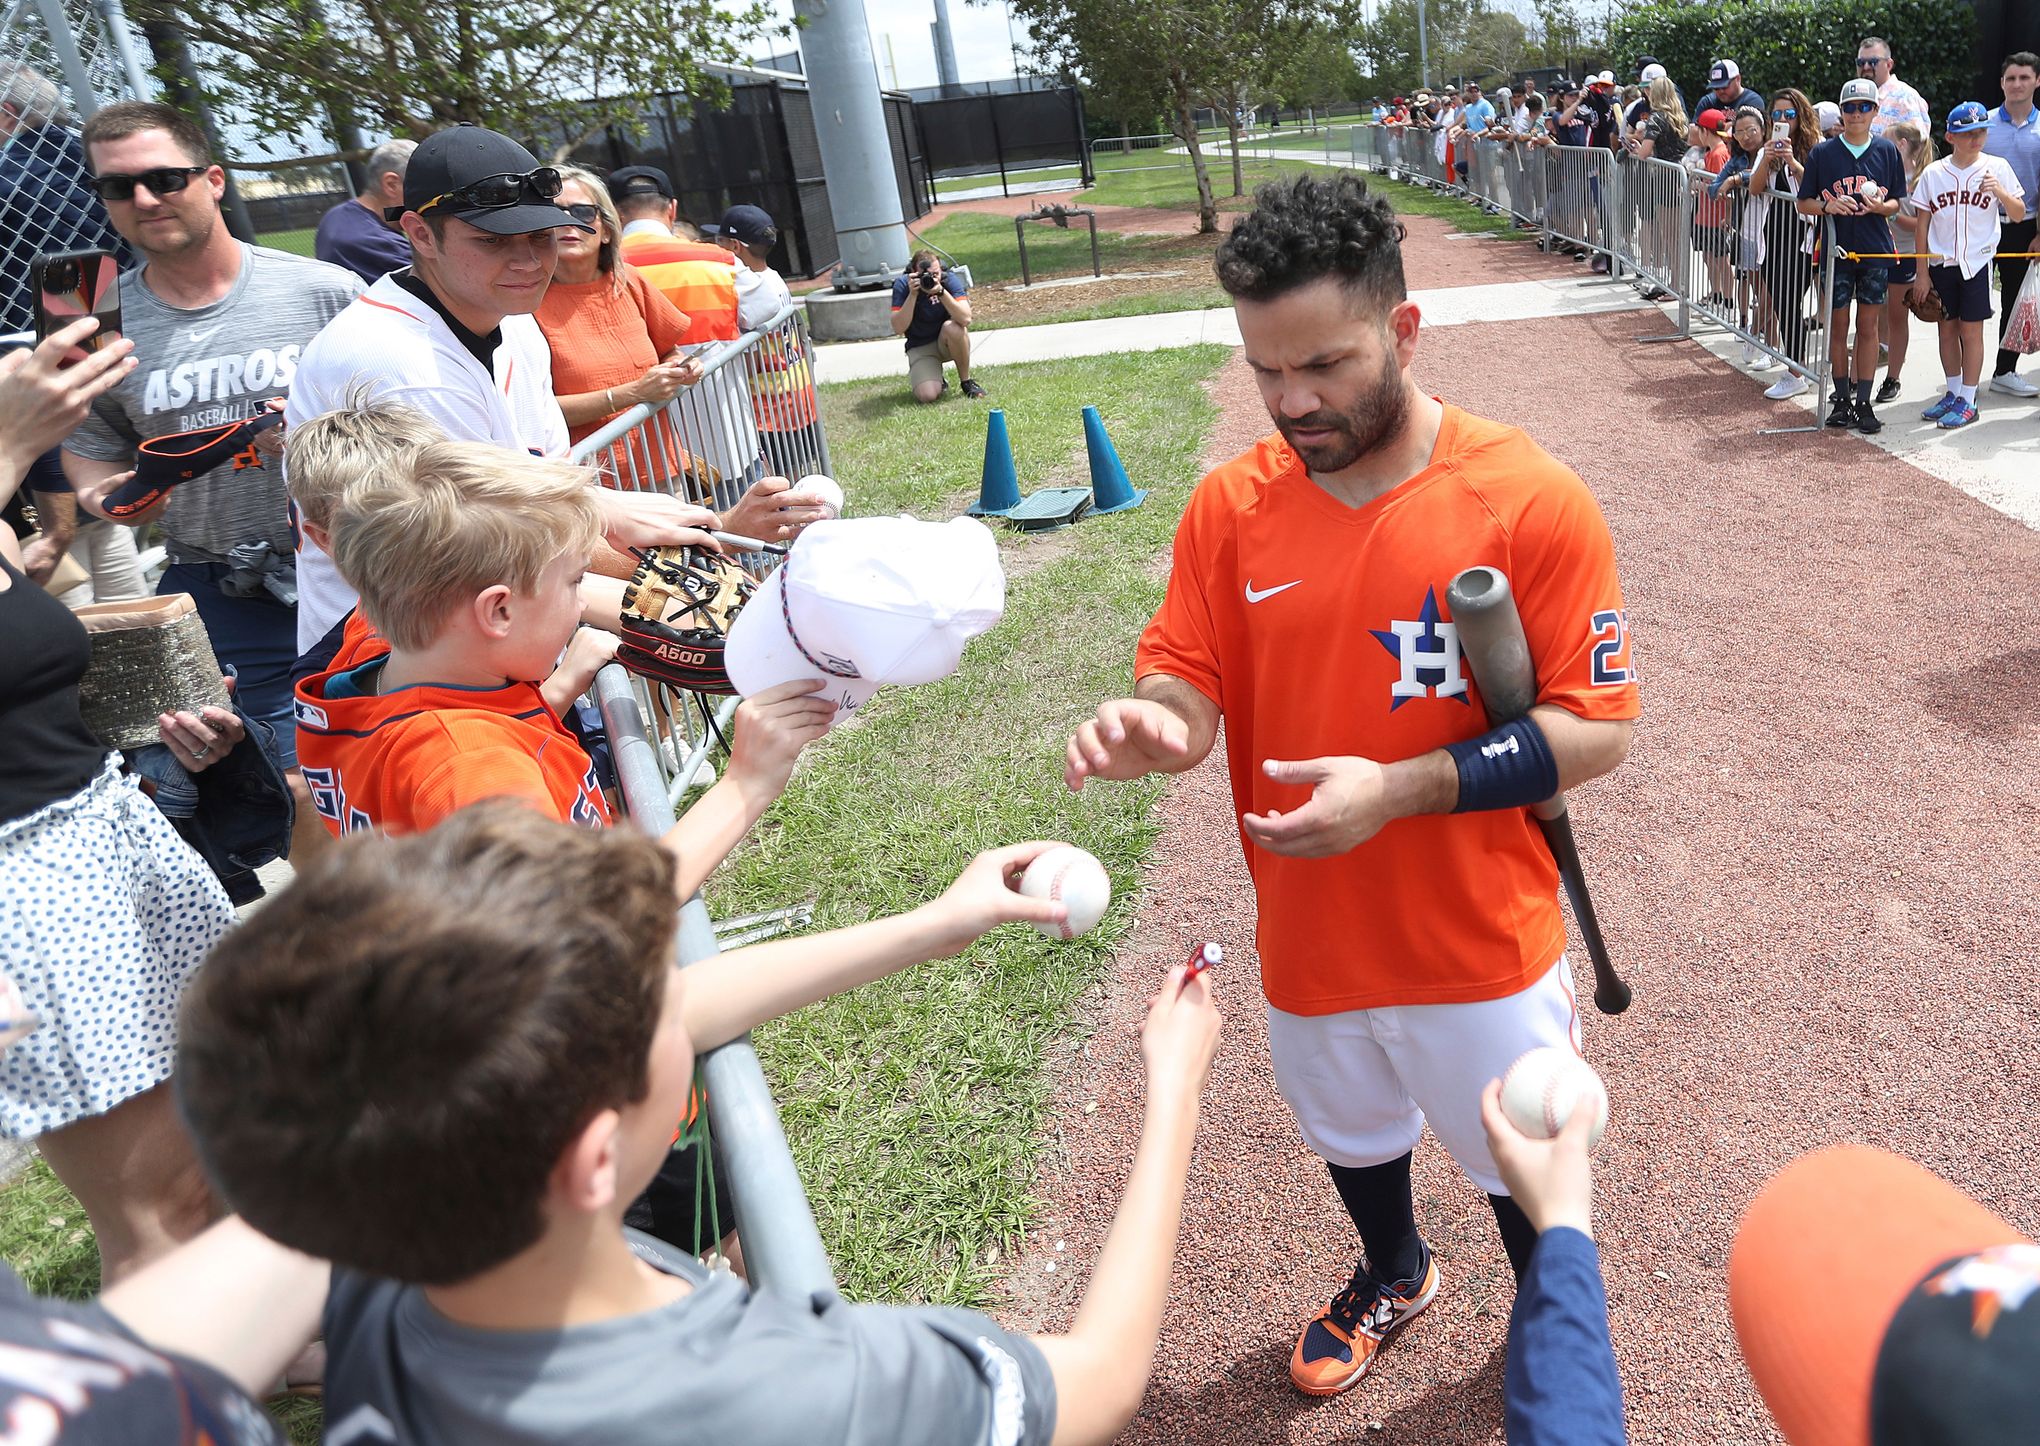 J.C. Correa making name for himself with Astros